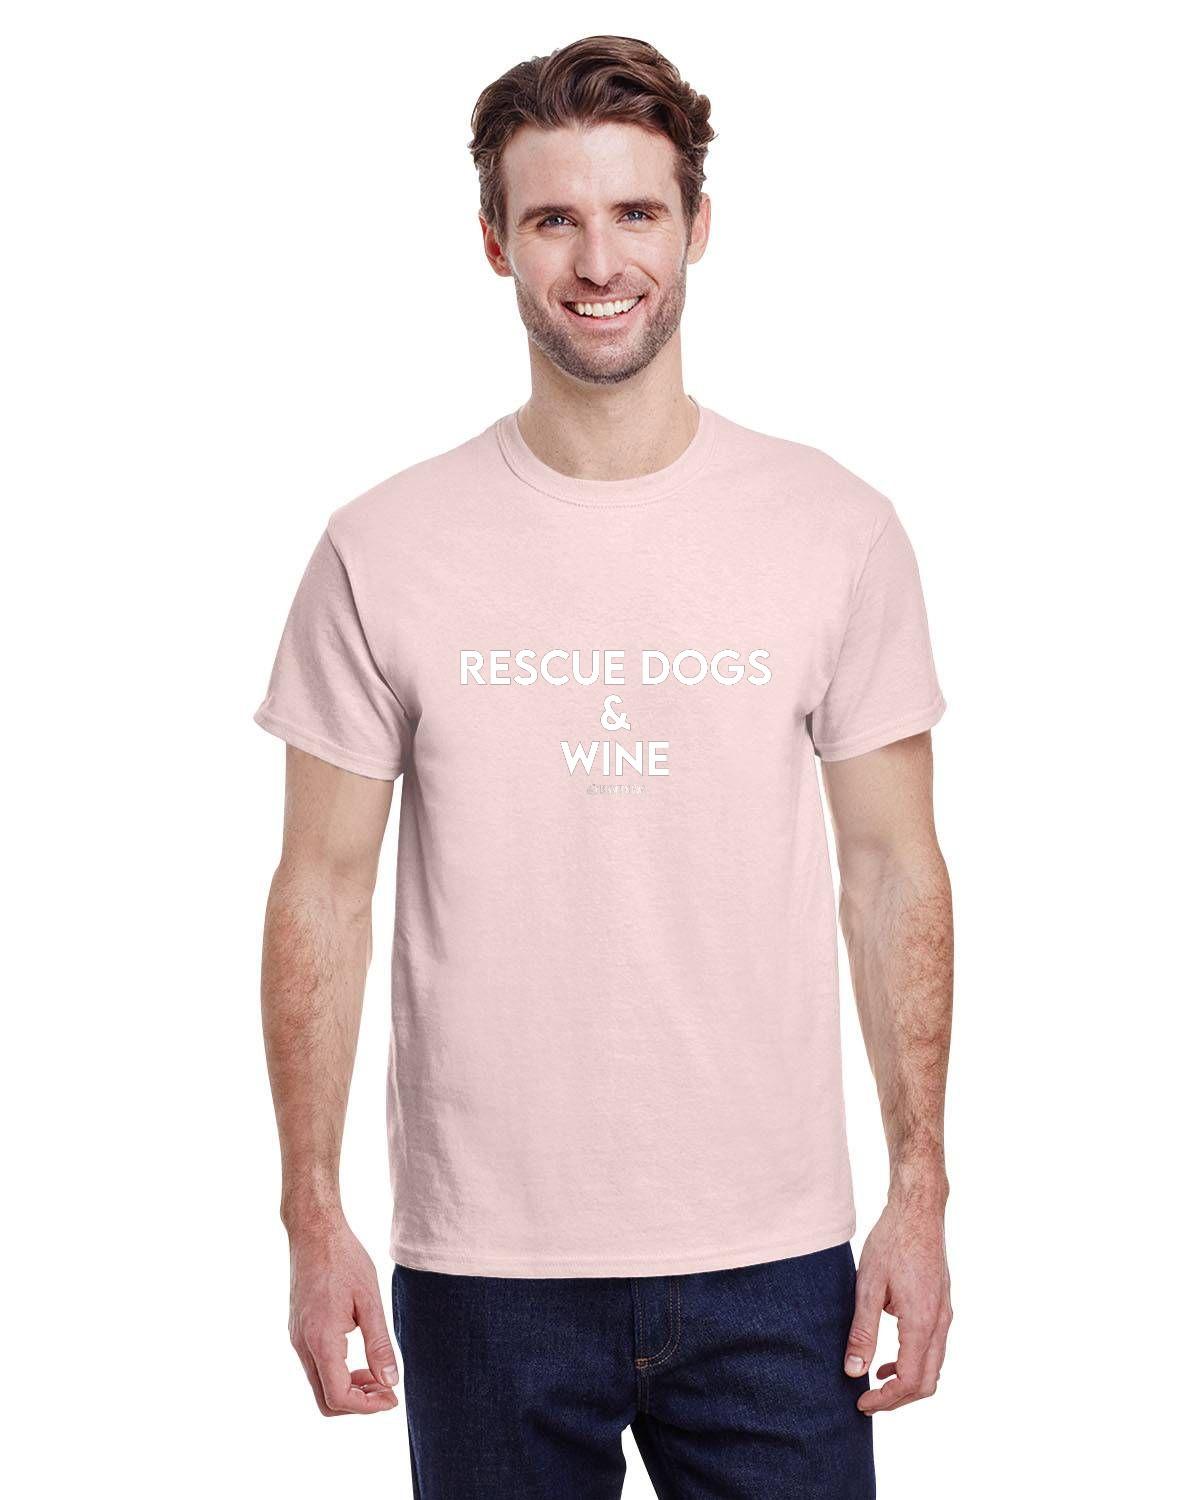 Rescue Dogs and Wine T-Shirt